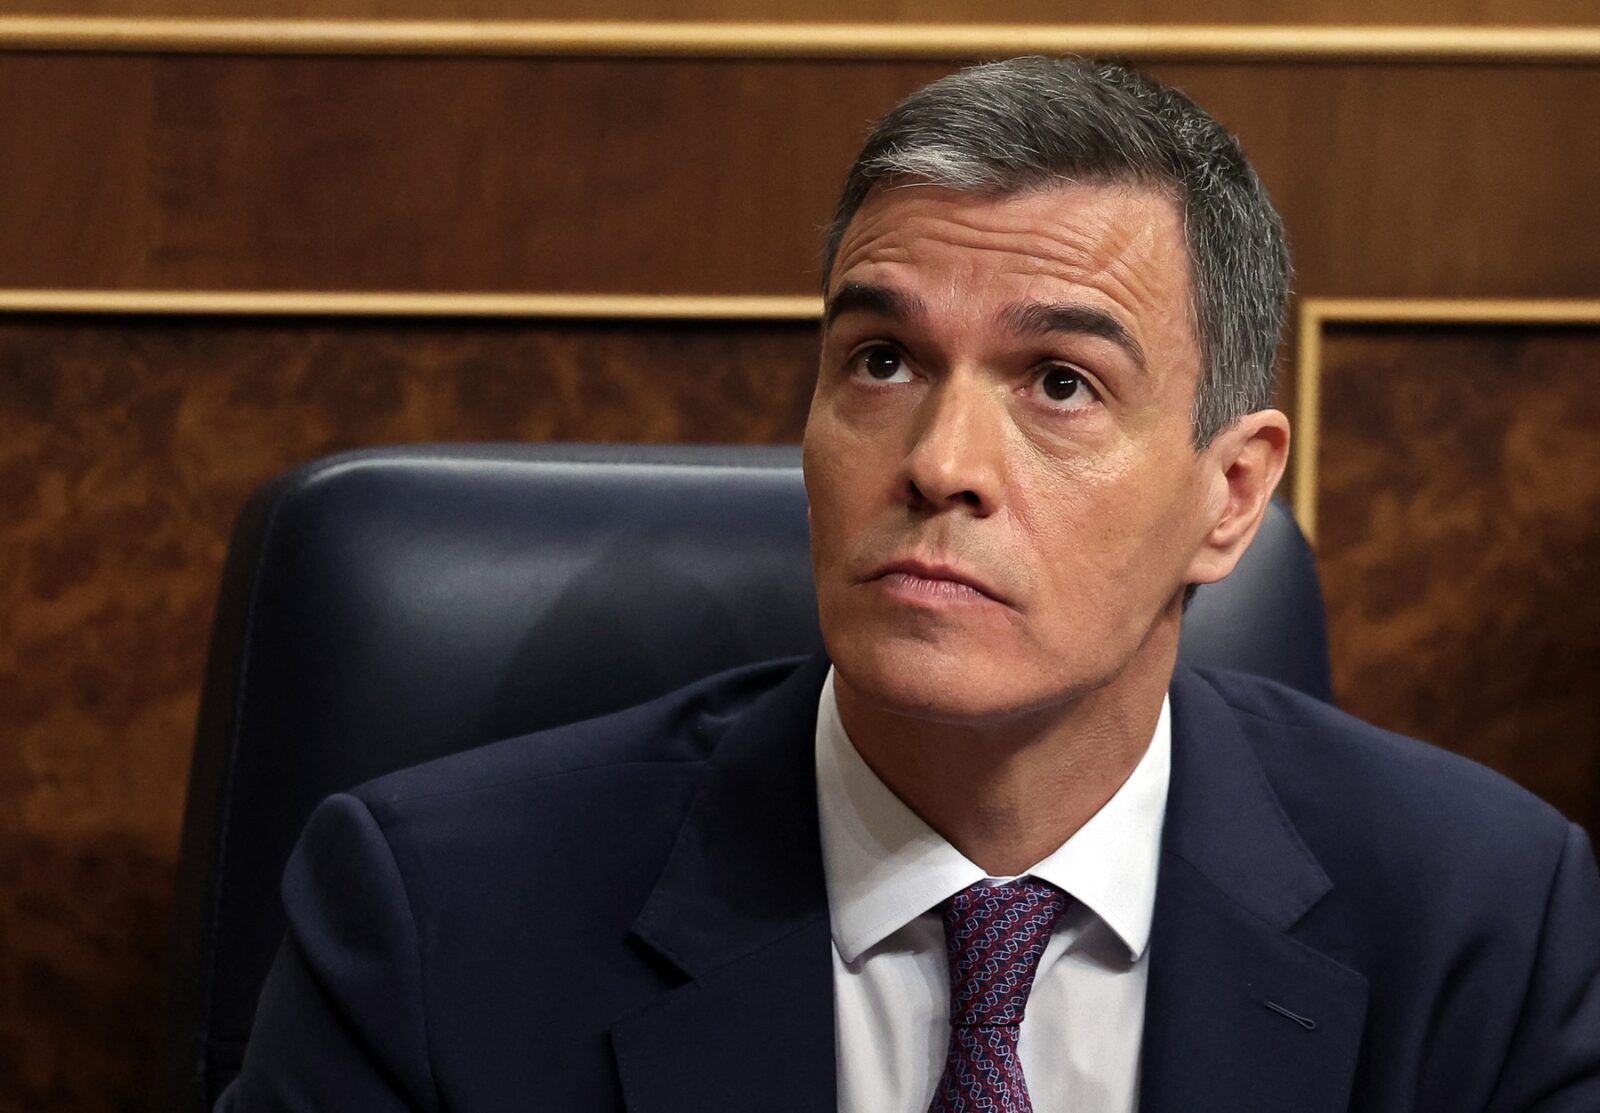 Spain's Prime Minister Pedro Sanchez looks on after delivering a speech to announce that Spain will recognise Palestine as a state on May 28, at the Congress of Deputies in Madrid on May 22, 2024. "Next Tuesday, May 28, Spain's cabinet will approve the recognition of the Palestinian state," he said, adding that his Israeli counterpart Benjamin Netanyahu was putting the two state solution in "danger" with his policy of "pain and destruction" in the Gaza Strip.,Image: 875452179, License: Rights-managed, Restrictions: , Model Release: no, Credit line: Thomas COEX / AFP / Profimedia